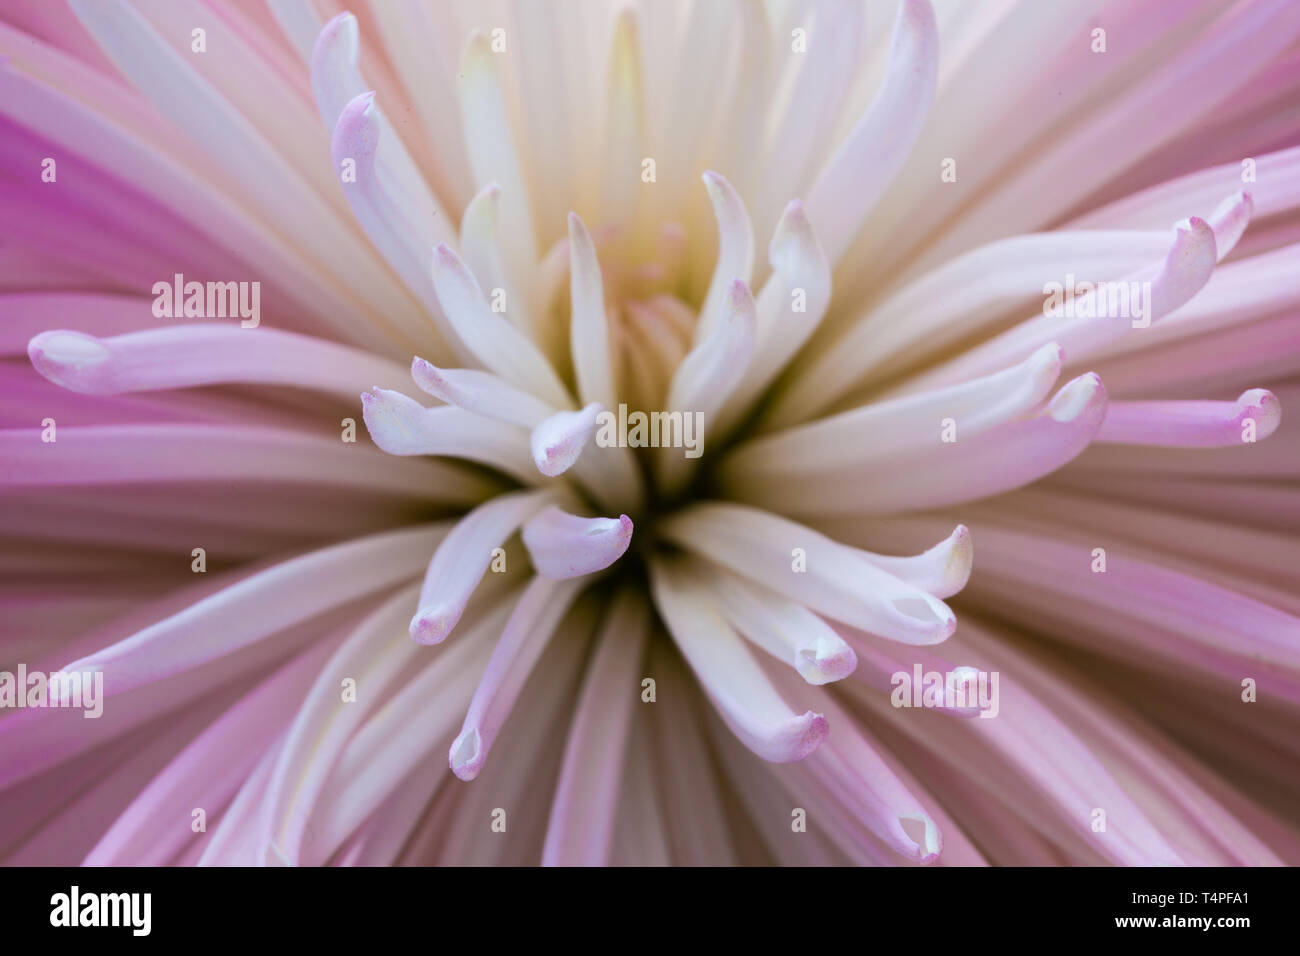 Abstract image of a pink flower with tubular petals Stock Photo